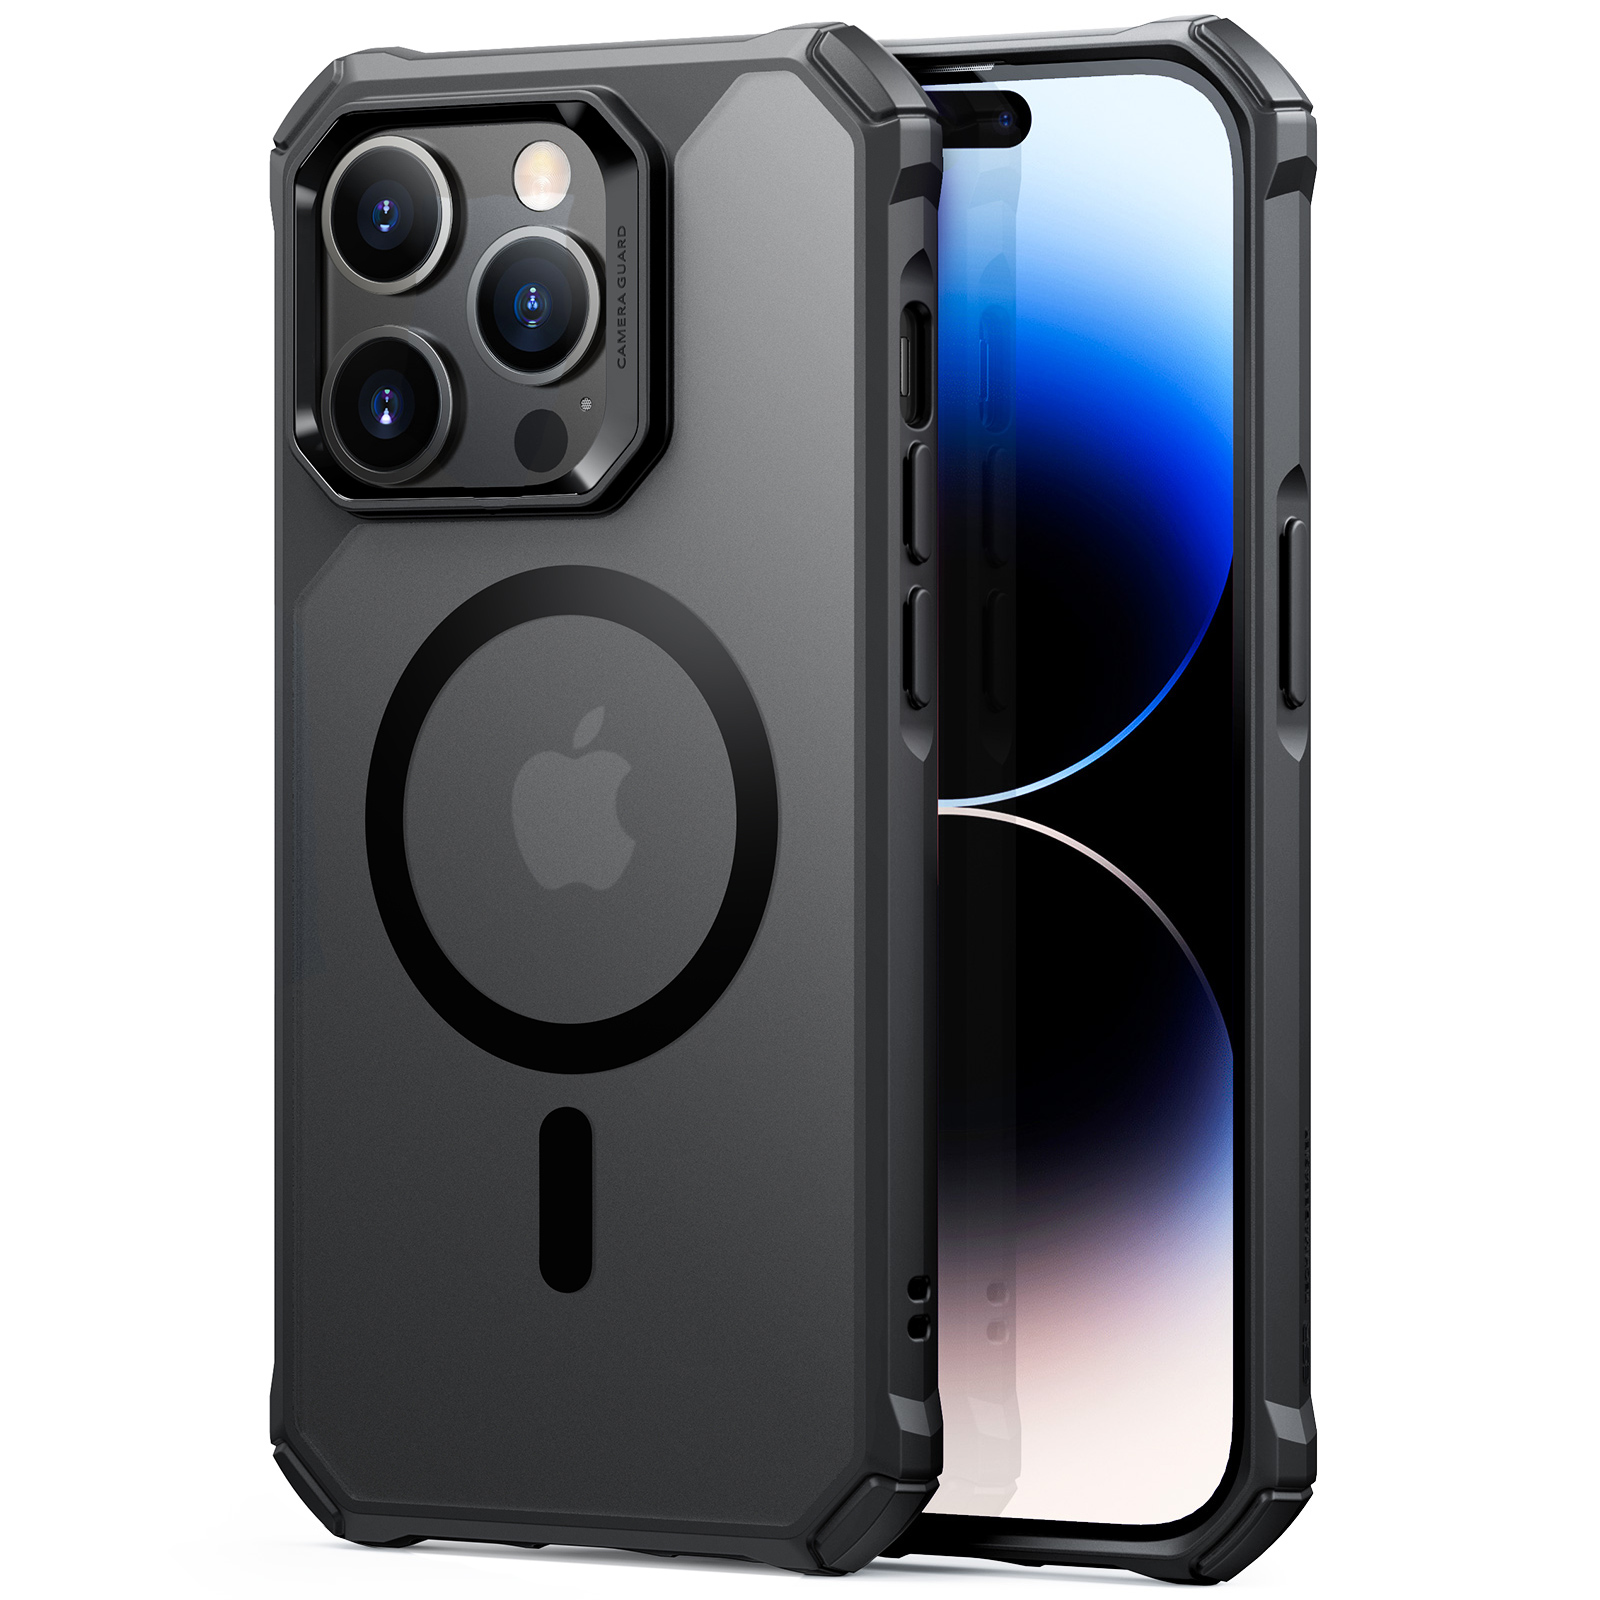 The Witcher 3 iPhone 12 Pro Max Case